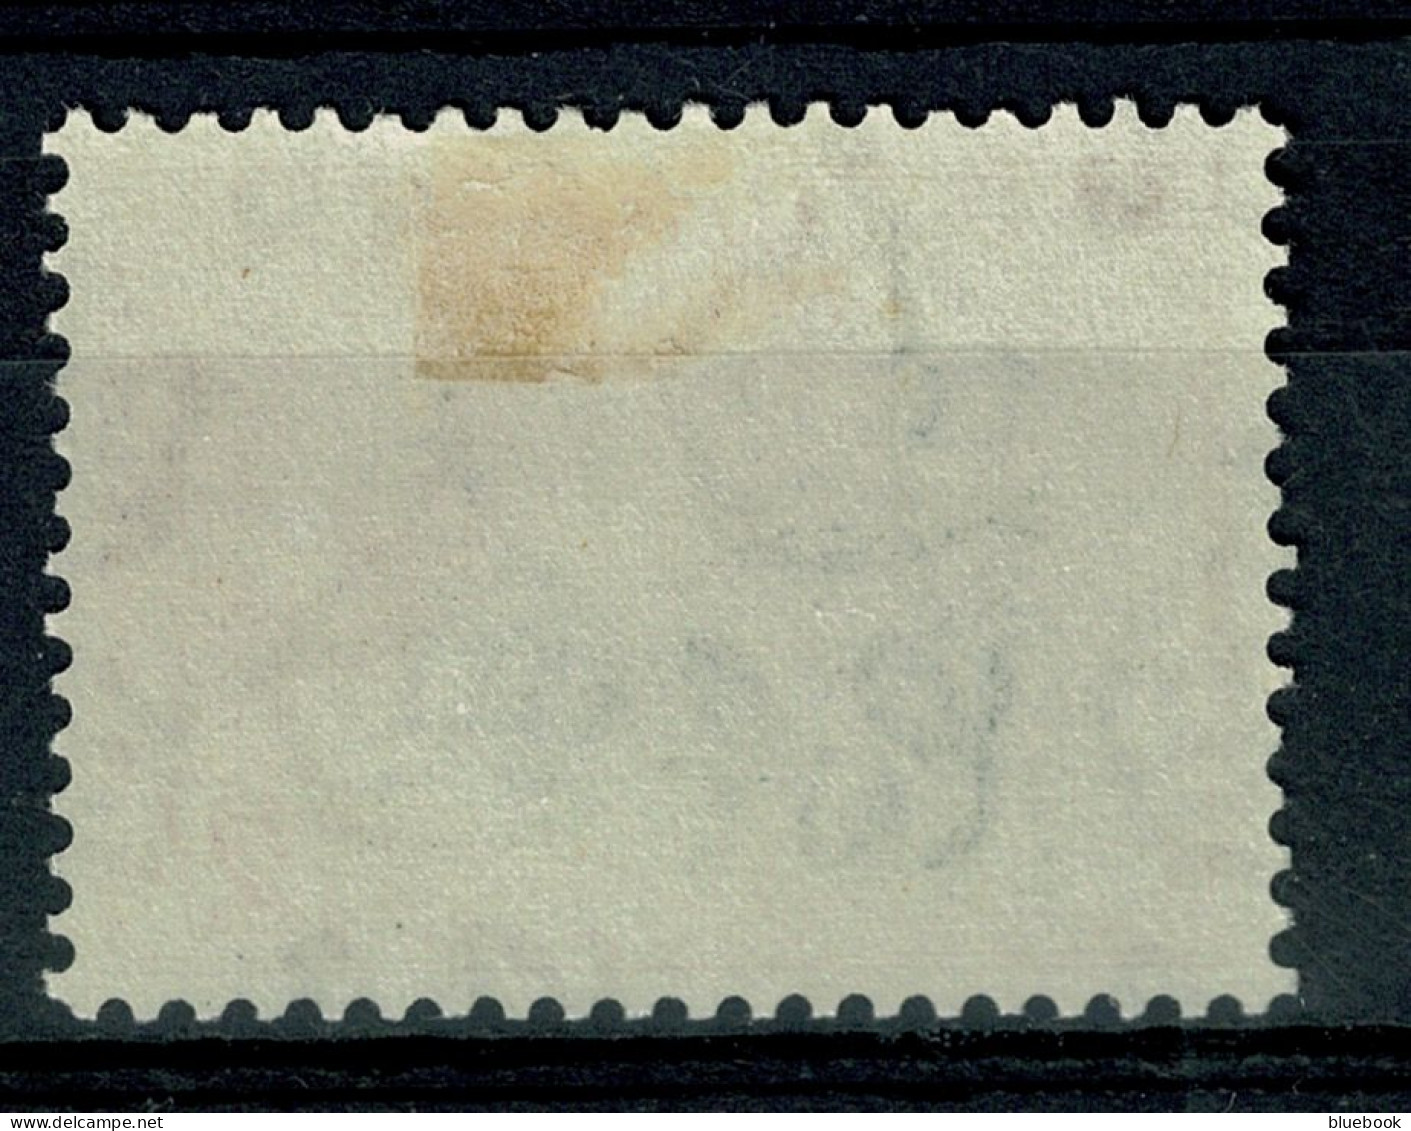 Ref 1640 - Gold Coast 1952 - 2/= Stamp - Trooping The Colours- Mounted Mint SG 162 - Goldküste (...-1957)